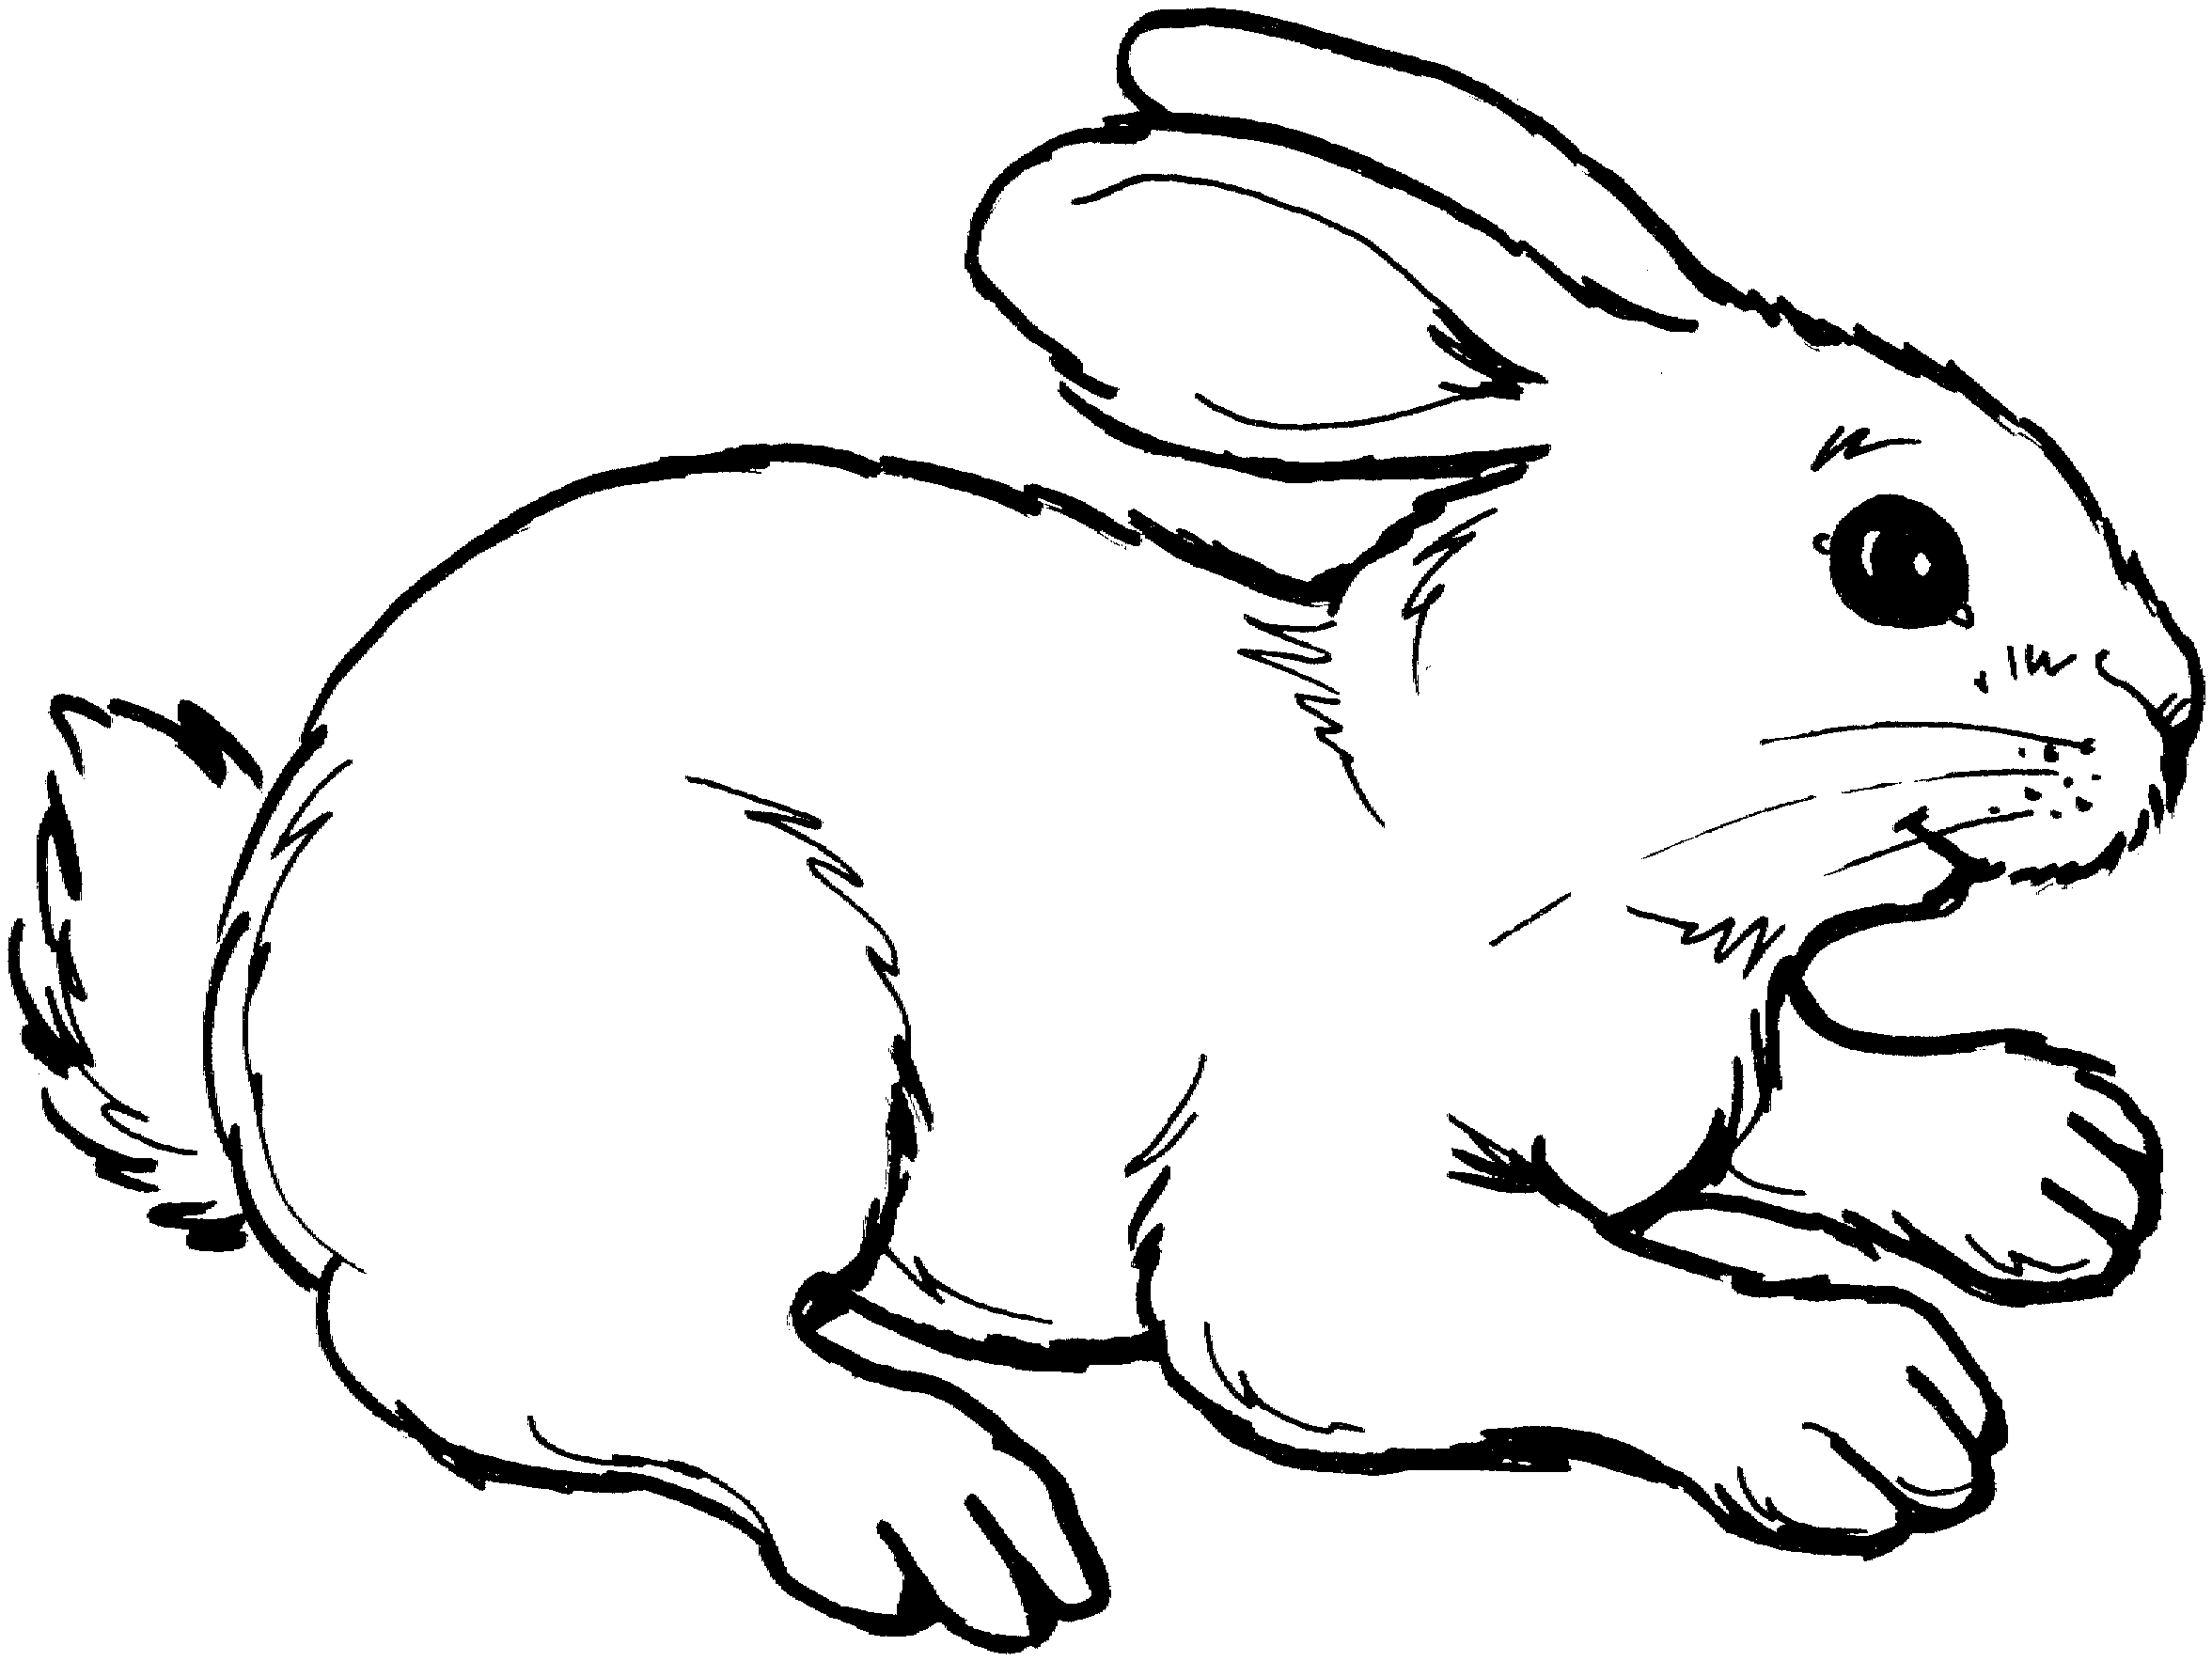 Rabbit . Clipart bunny black and white